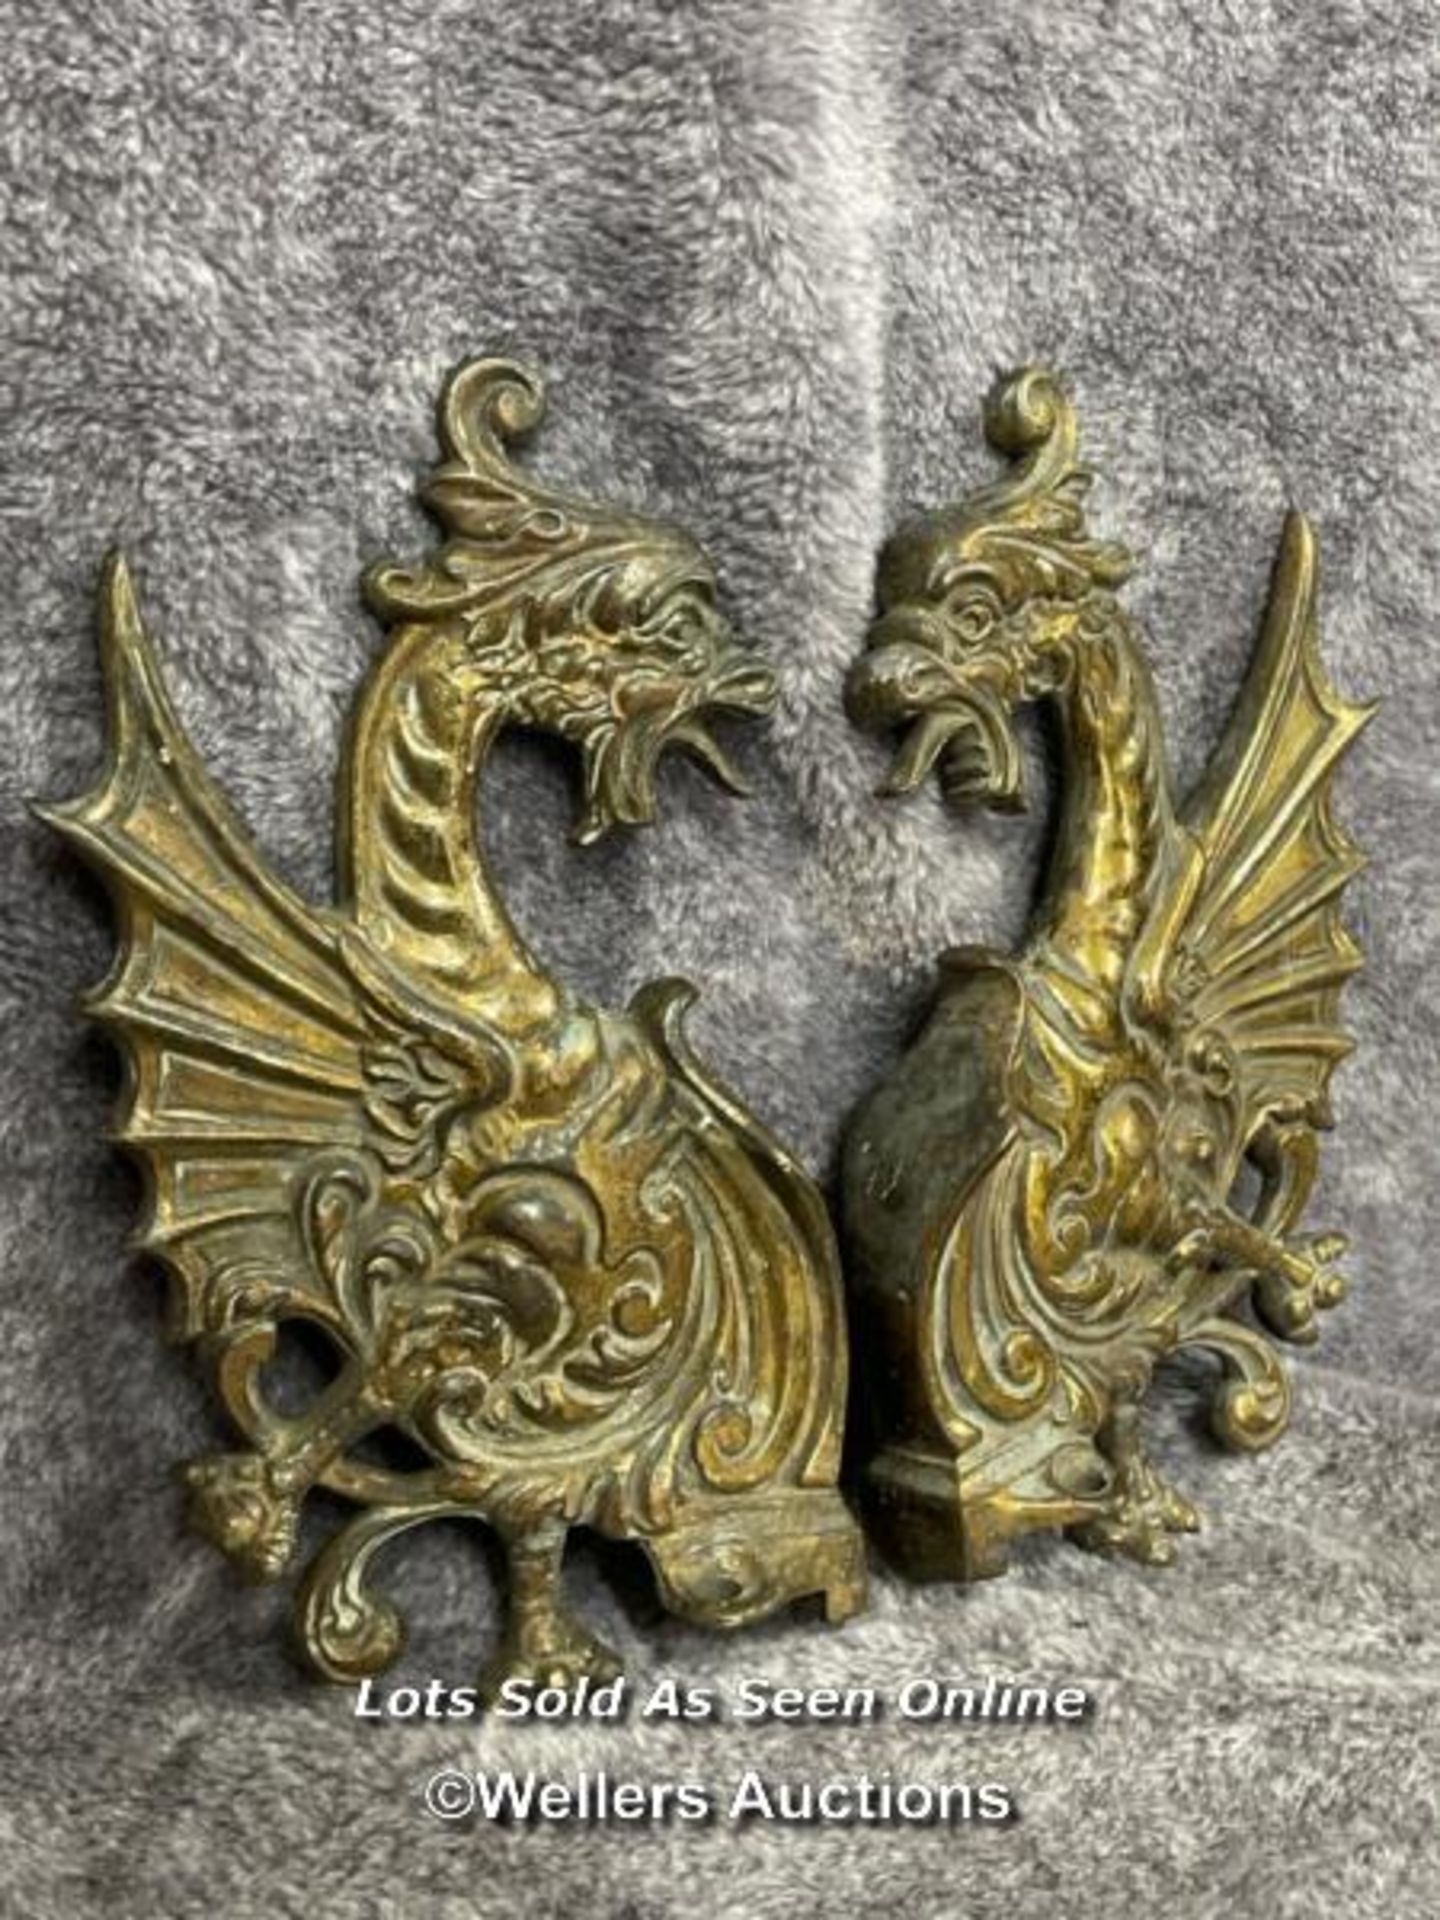 A pair of brass door fixtures in form of a dragon and one other iron door knocker, dragons 20cm high - Image 2 of 6